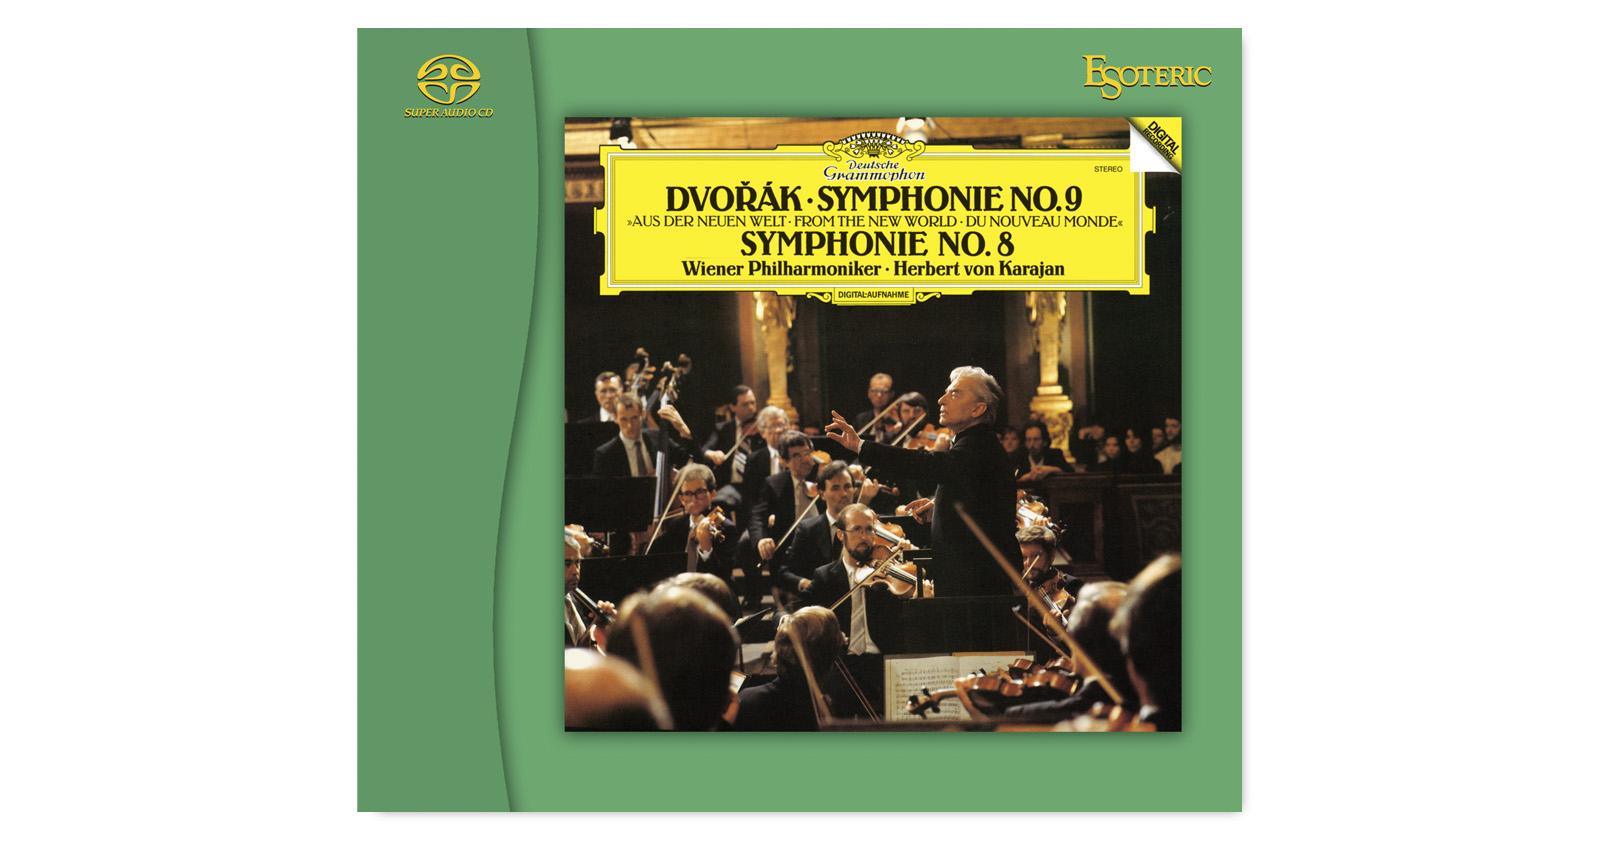 DVOŘÁK Symphonies Nos. 8 & 9 “From the New World